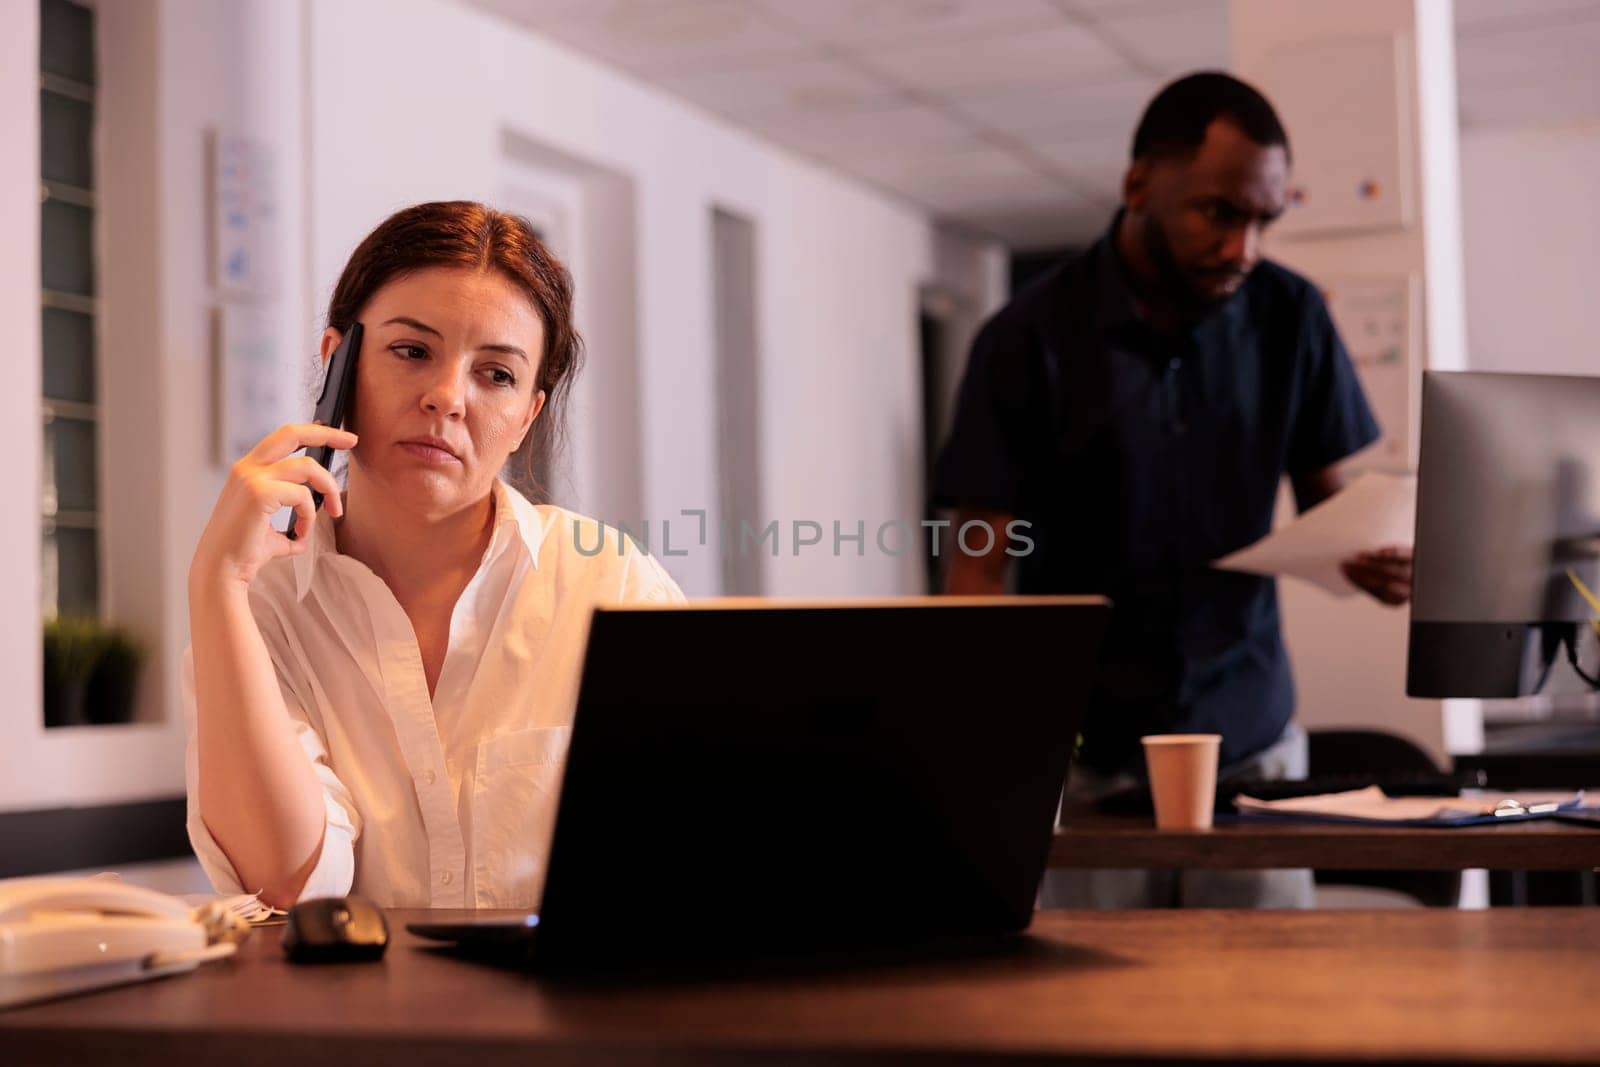 Secretary talking with colleague on smartphone in office, checking report on laptop, employee answering mobile call. Corporate worker having telephone communication in coworking space, telework